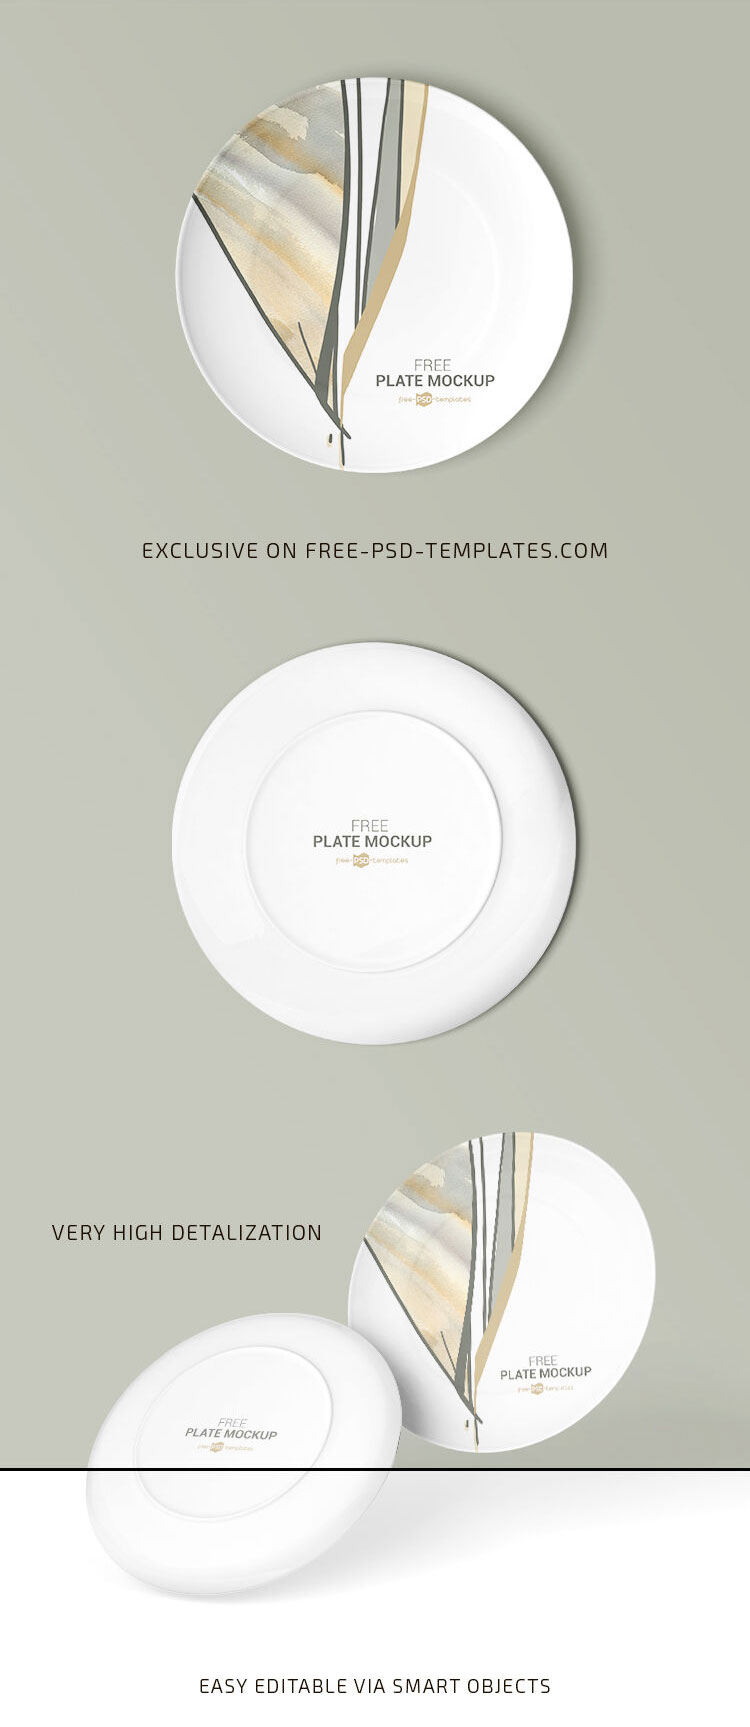 4 Mockups of Plates in Different Views and Positions FREE PSD